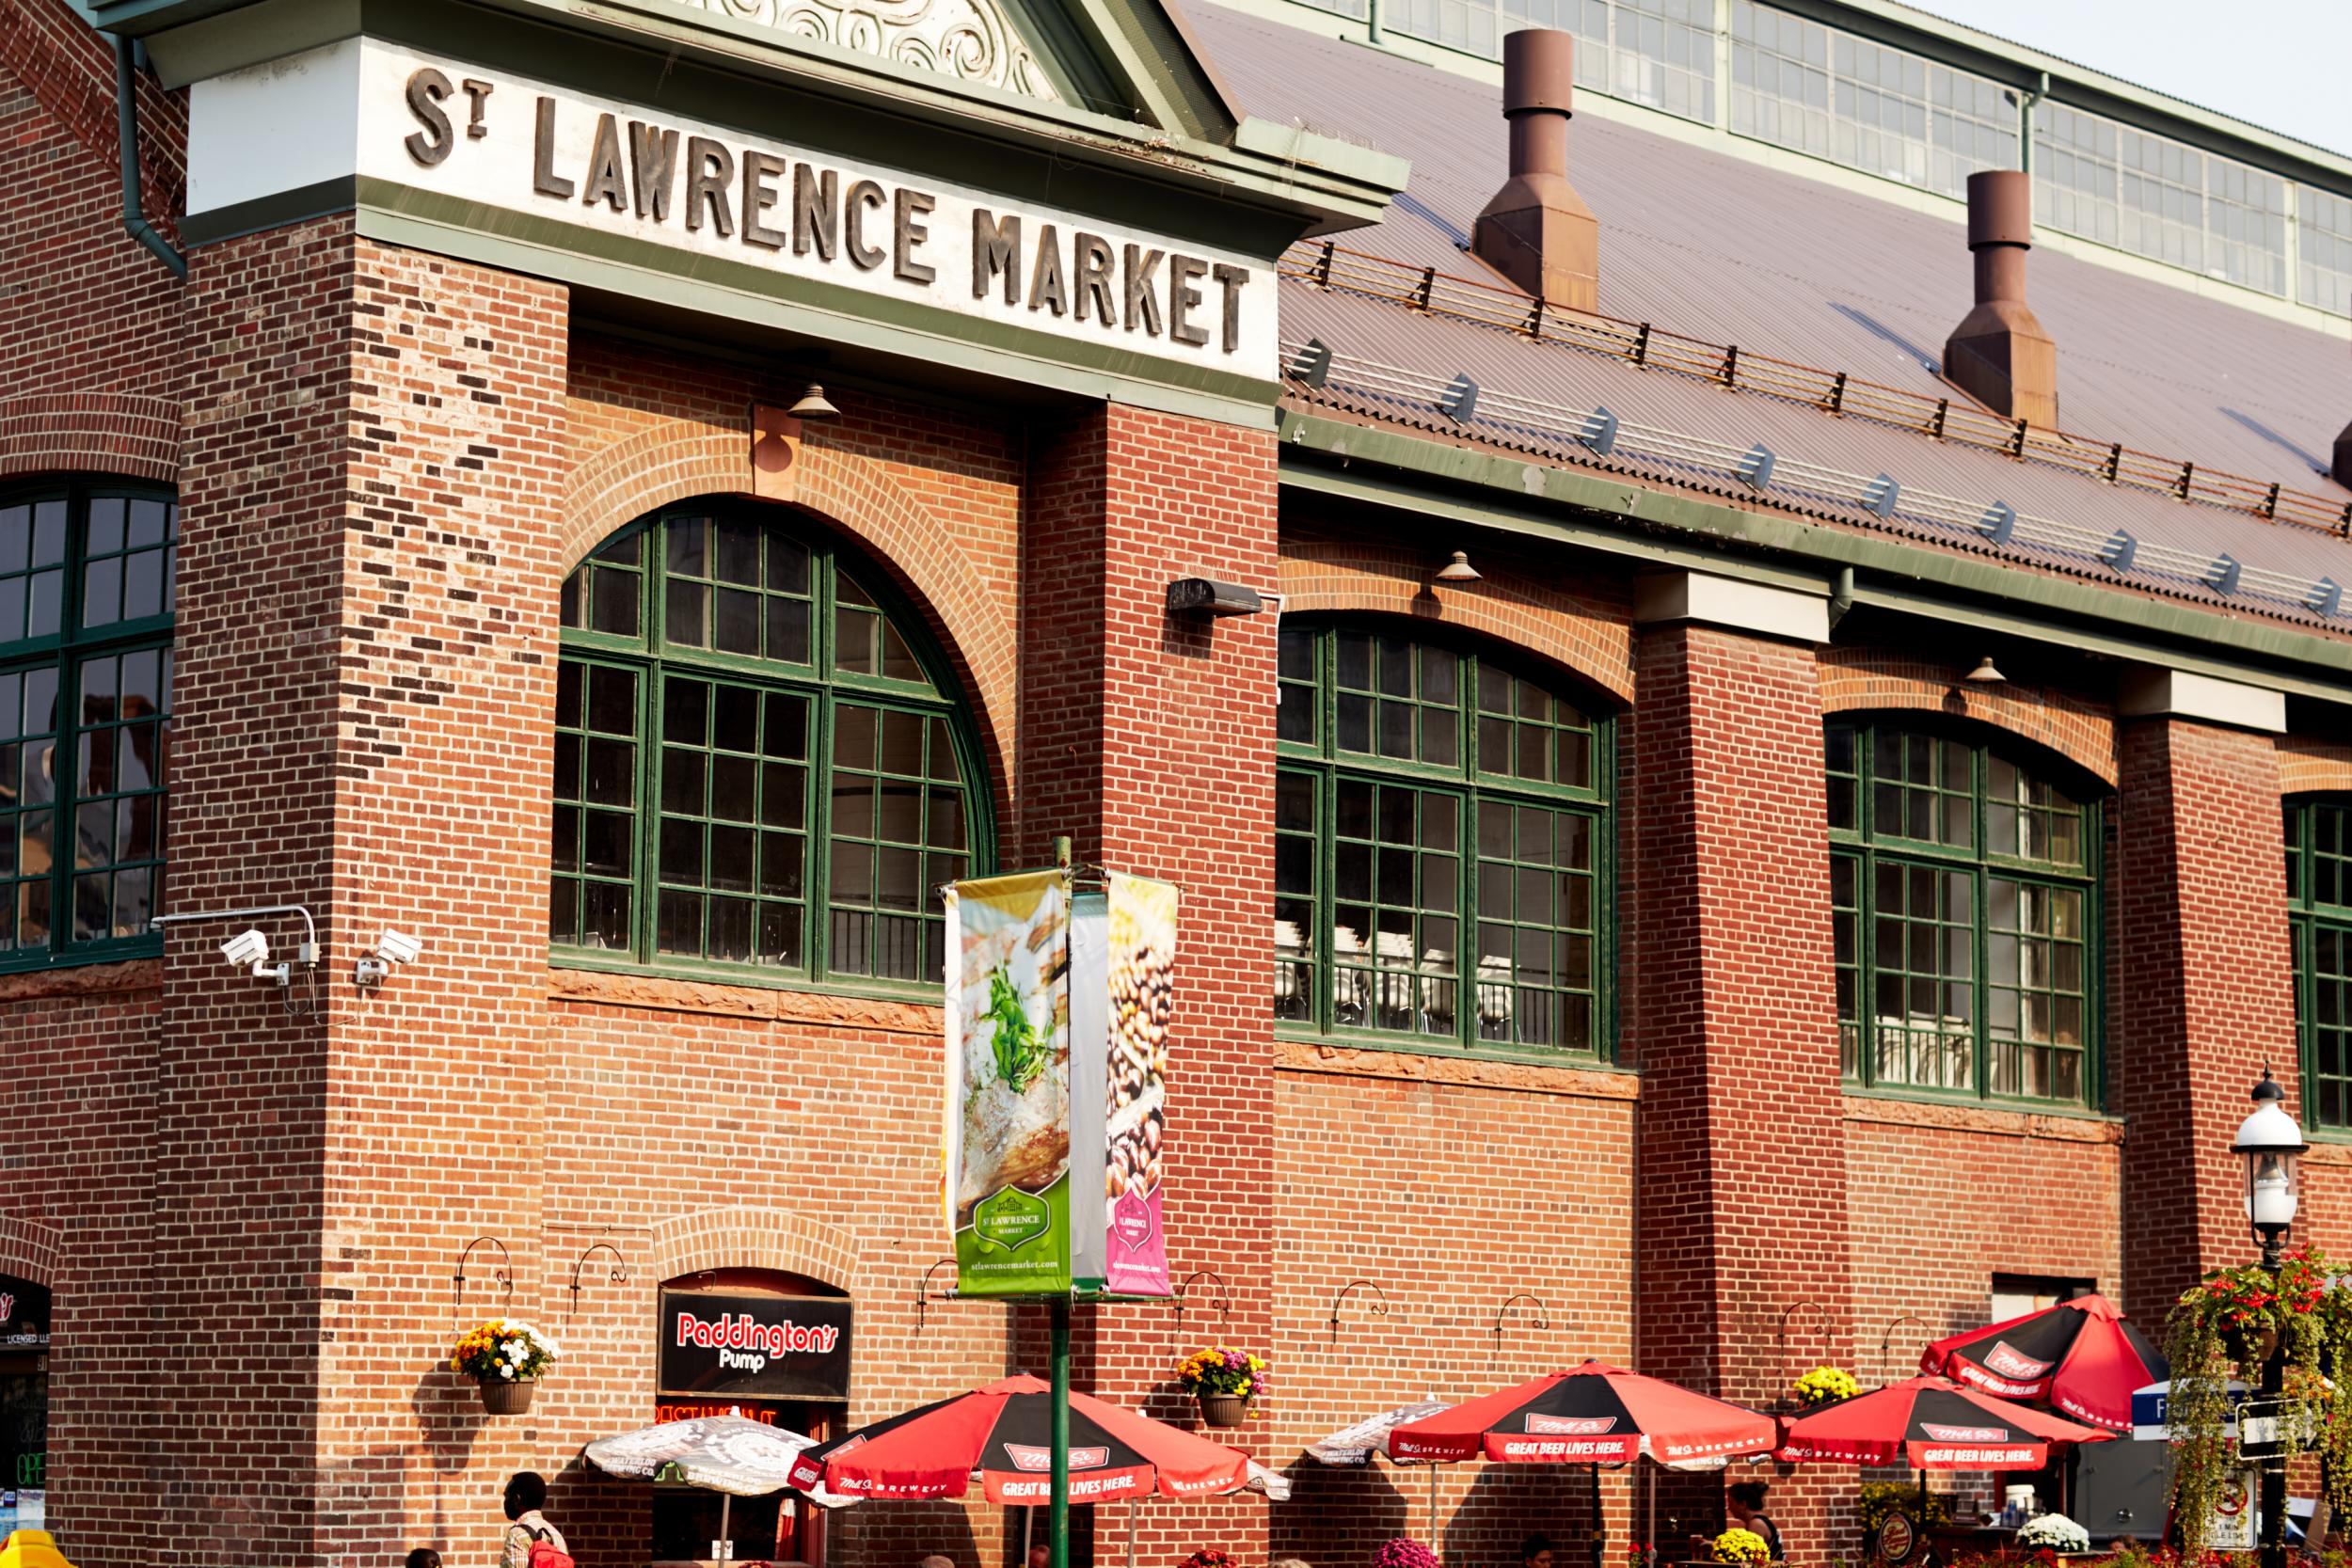 St Lawrence Market is a Toronto institution